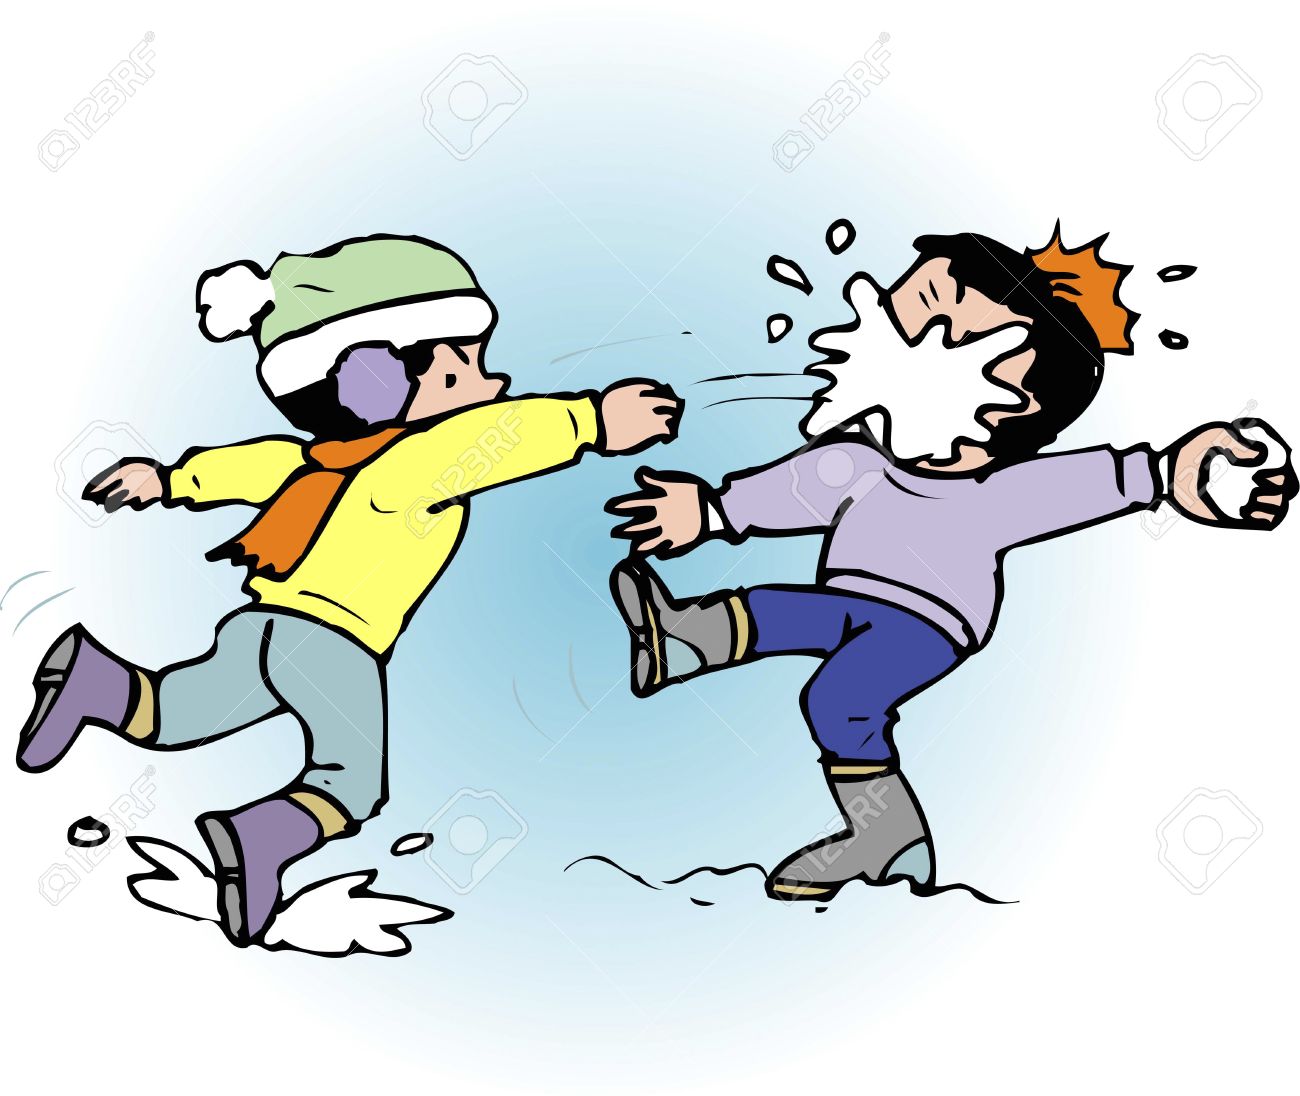 Snowball fight clipart free.